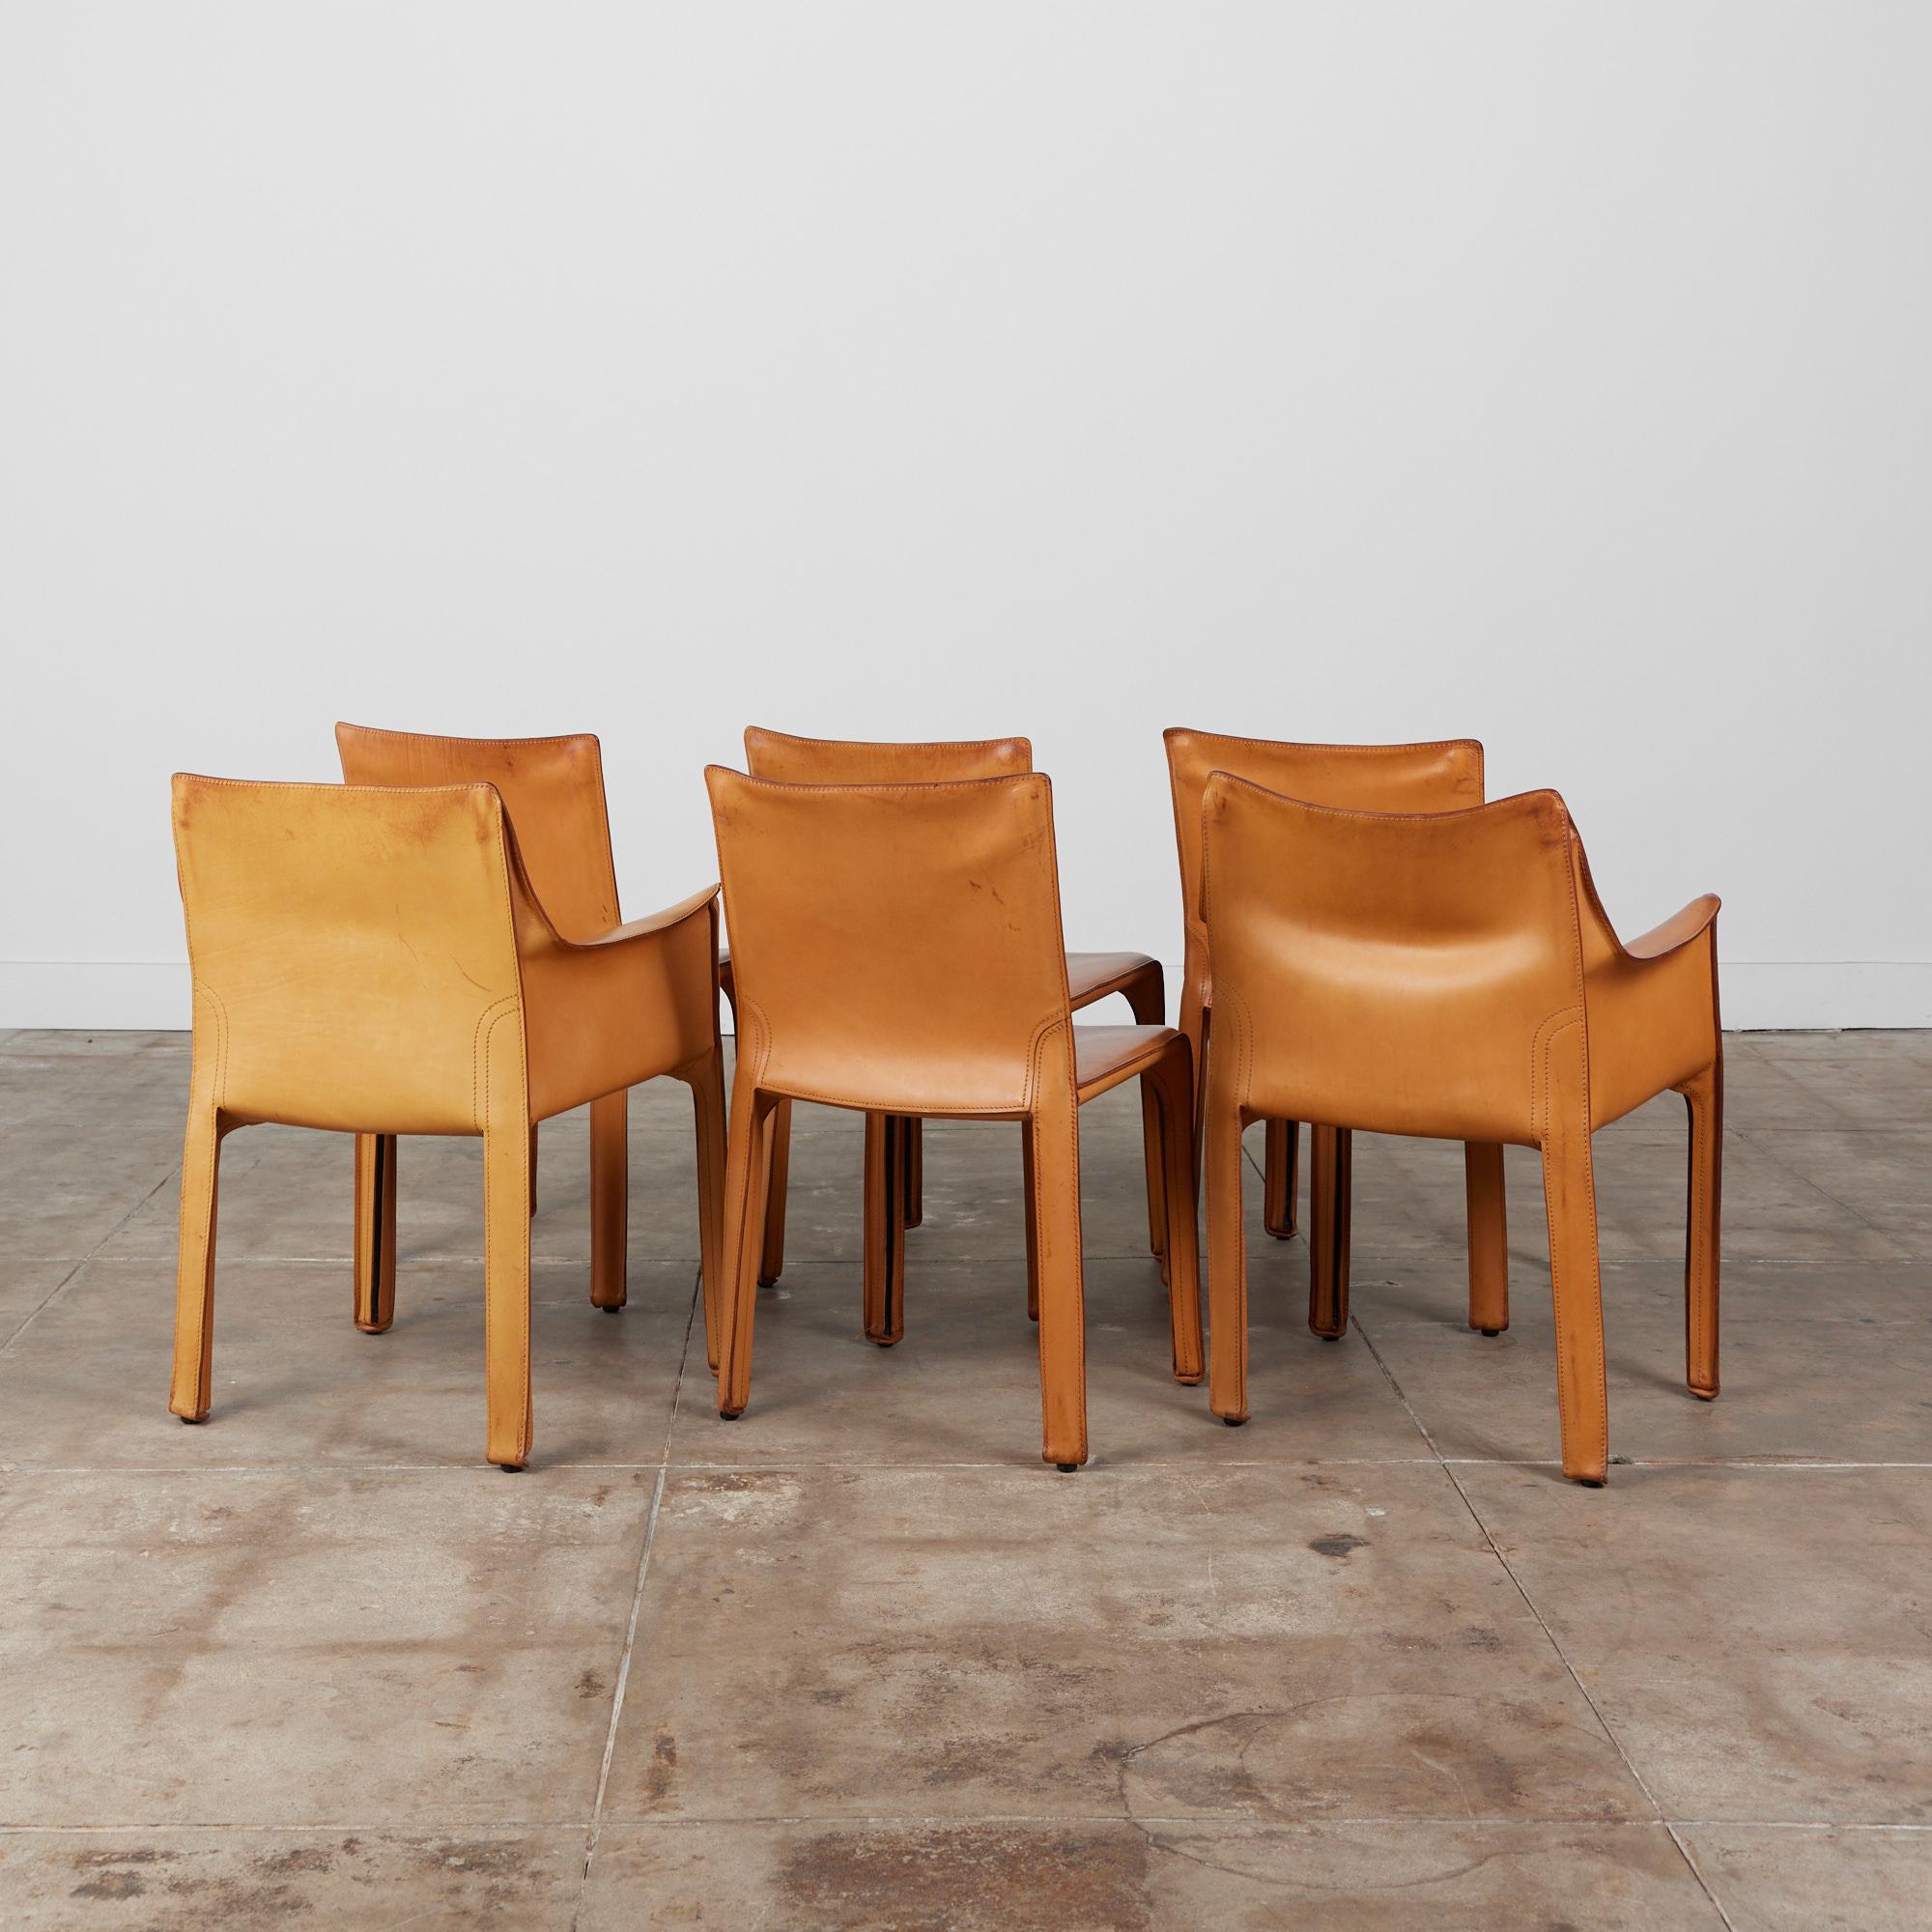 Steel Set of Six Mario Bellini Cab Chairs for Cassina